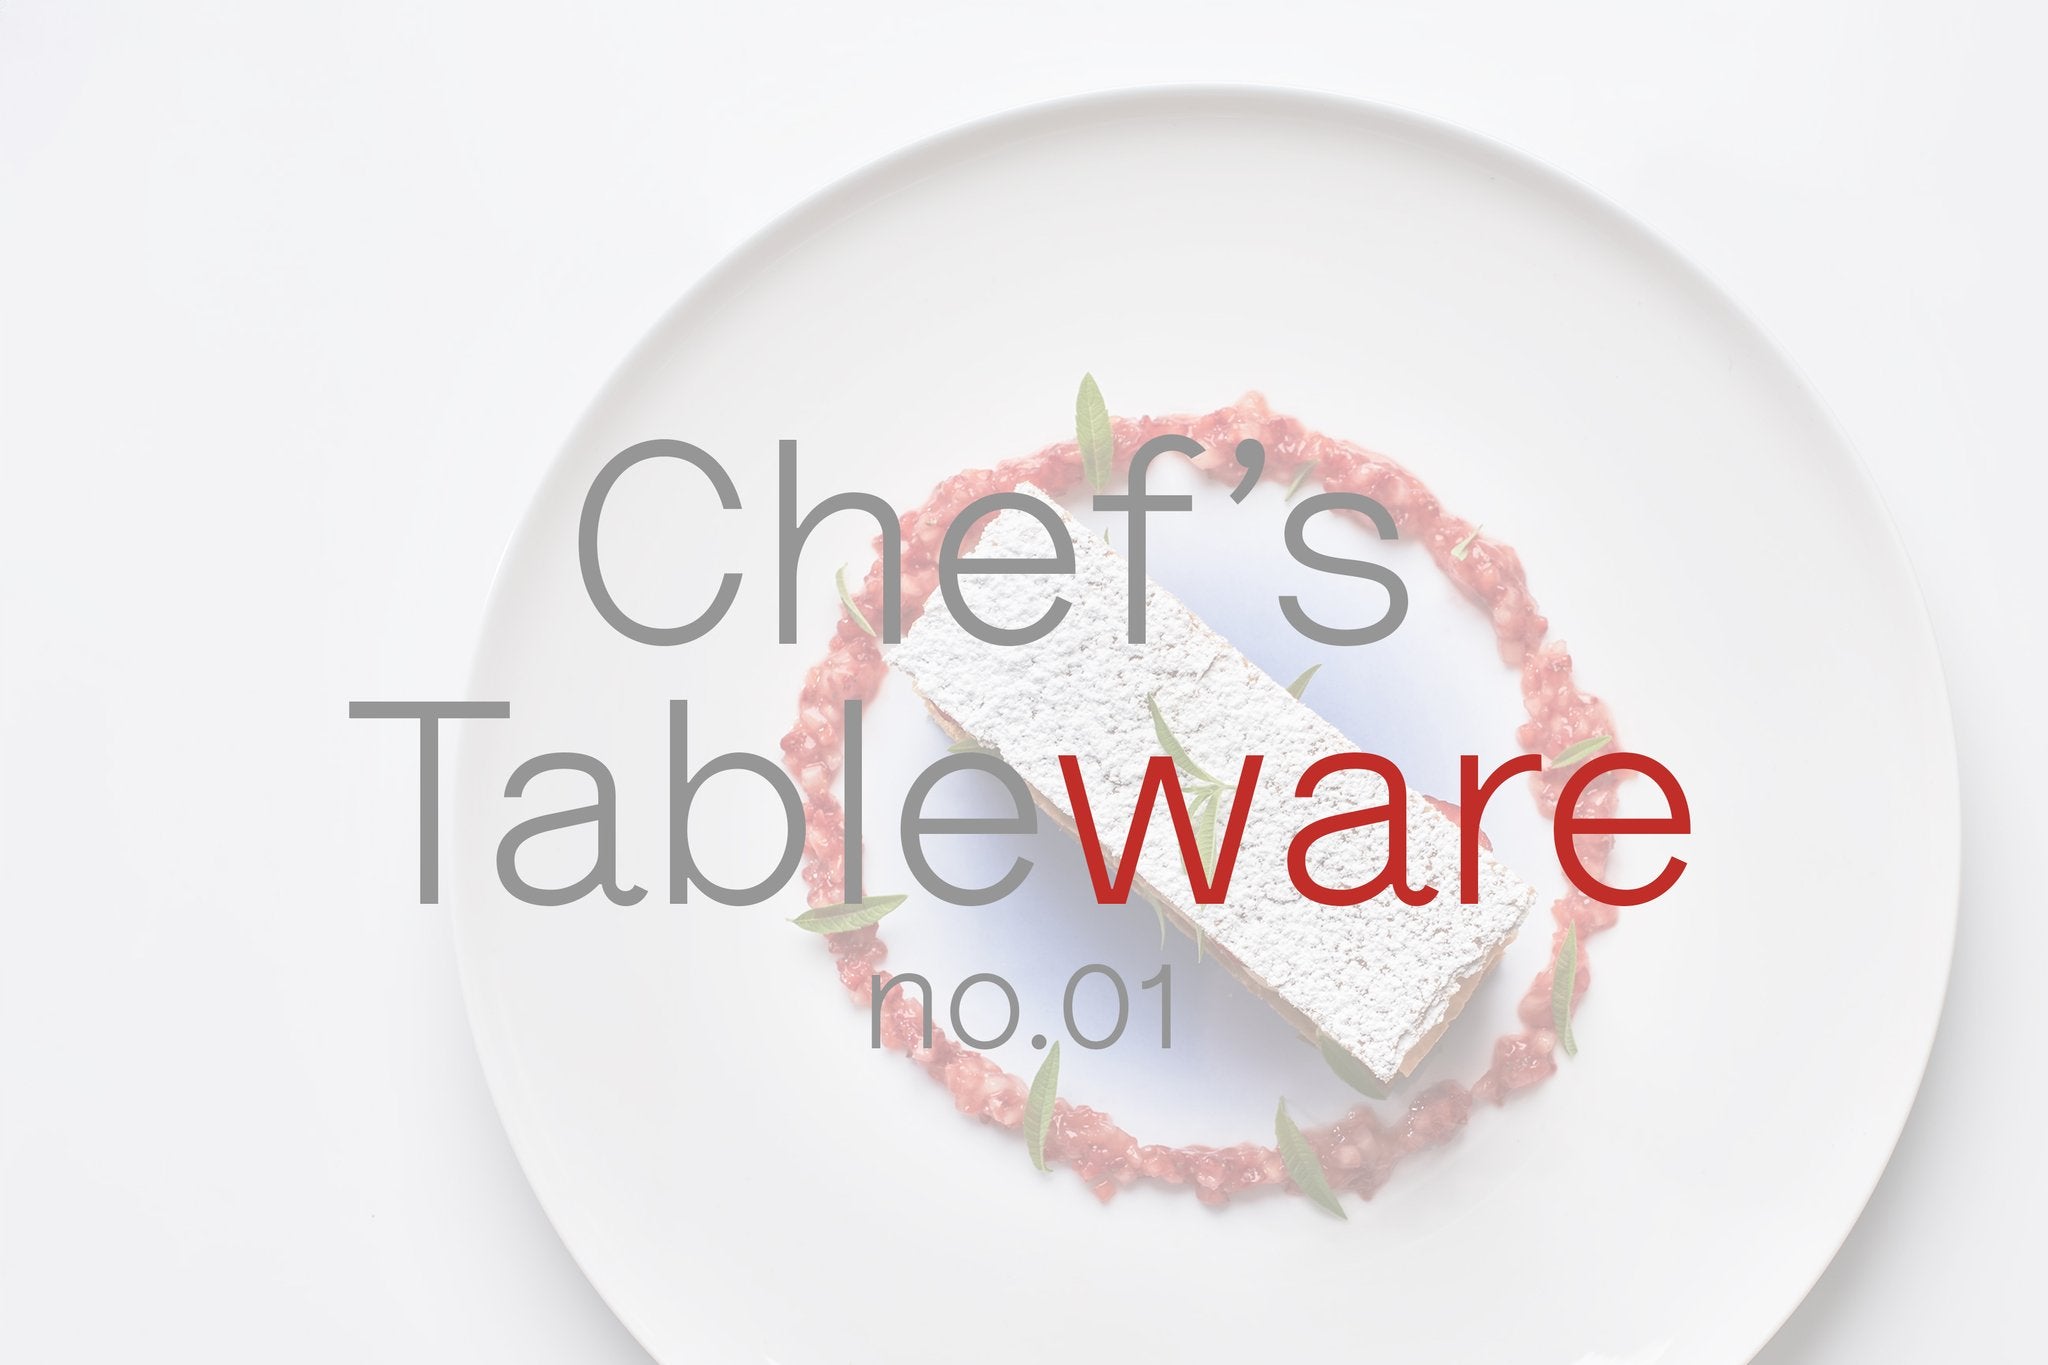 Chef's Tableware no. 01 | Five minutes with chef Asimakis Chaniotis of Pied à Terre